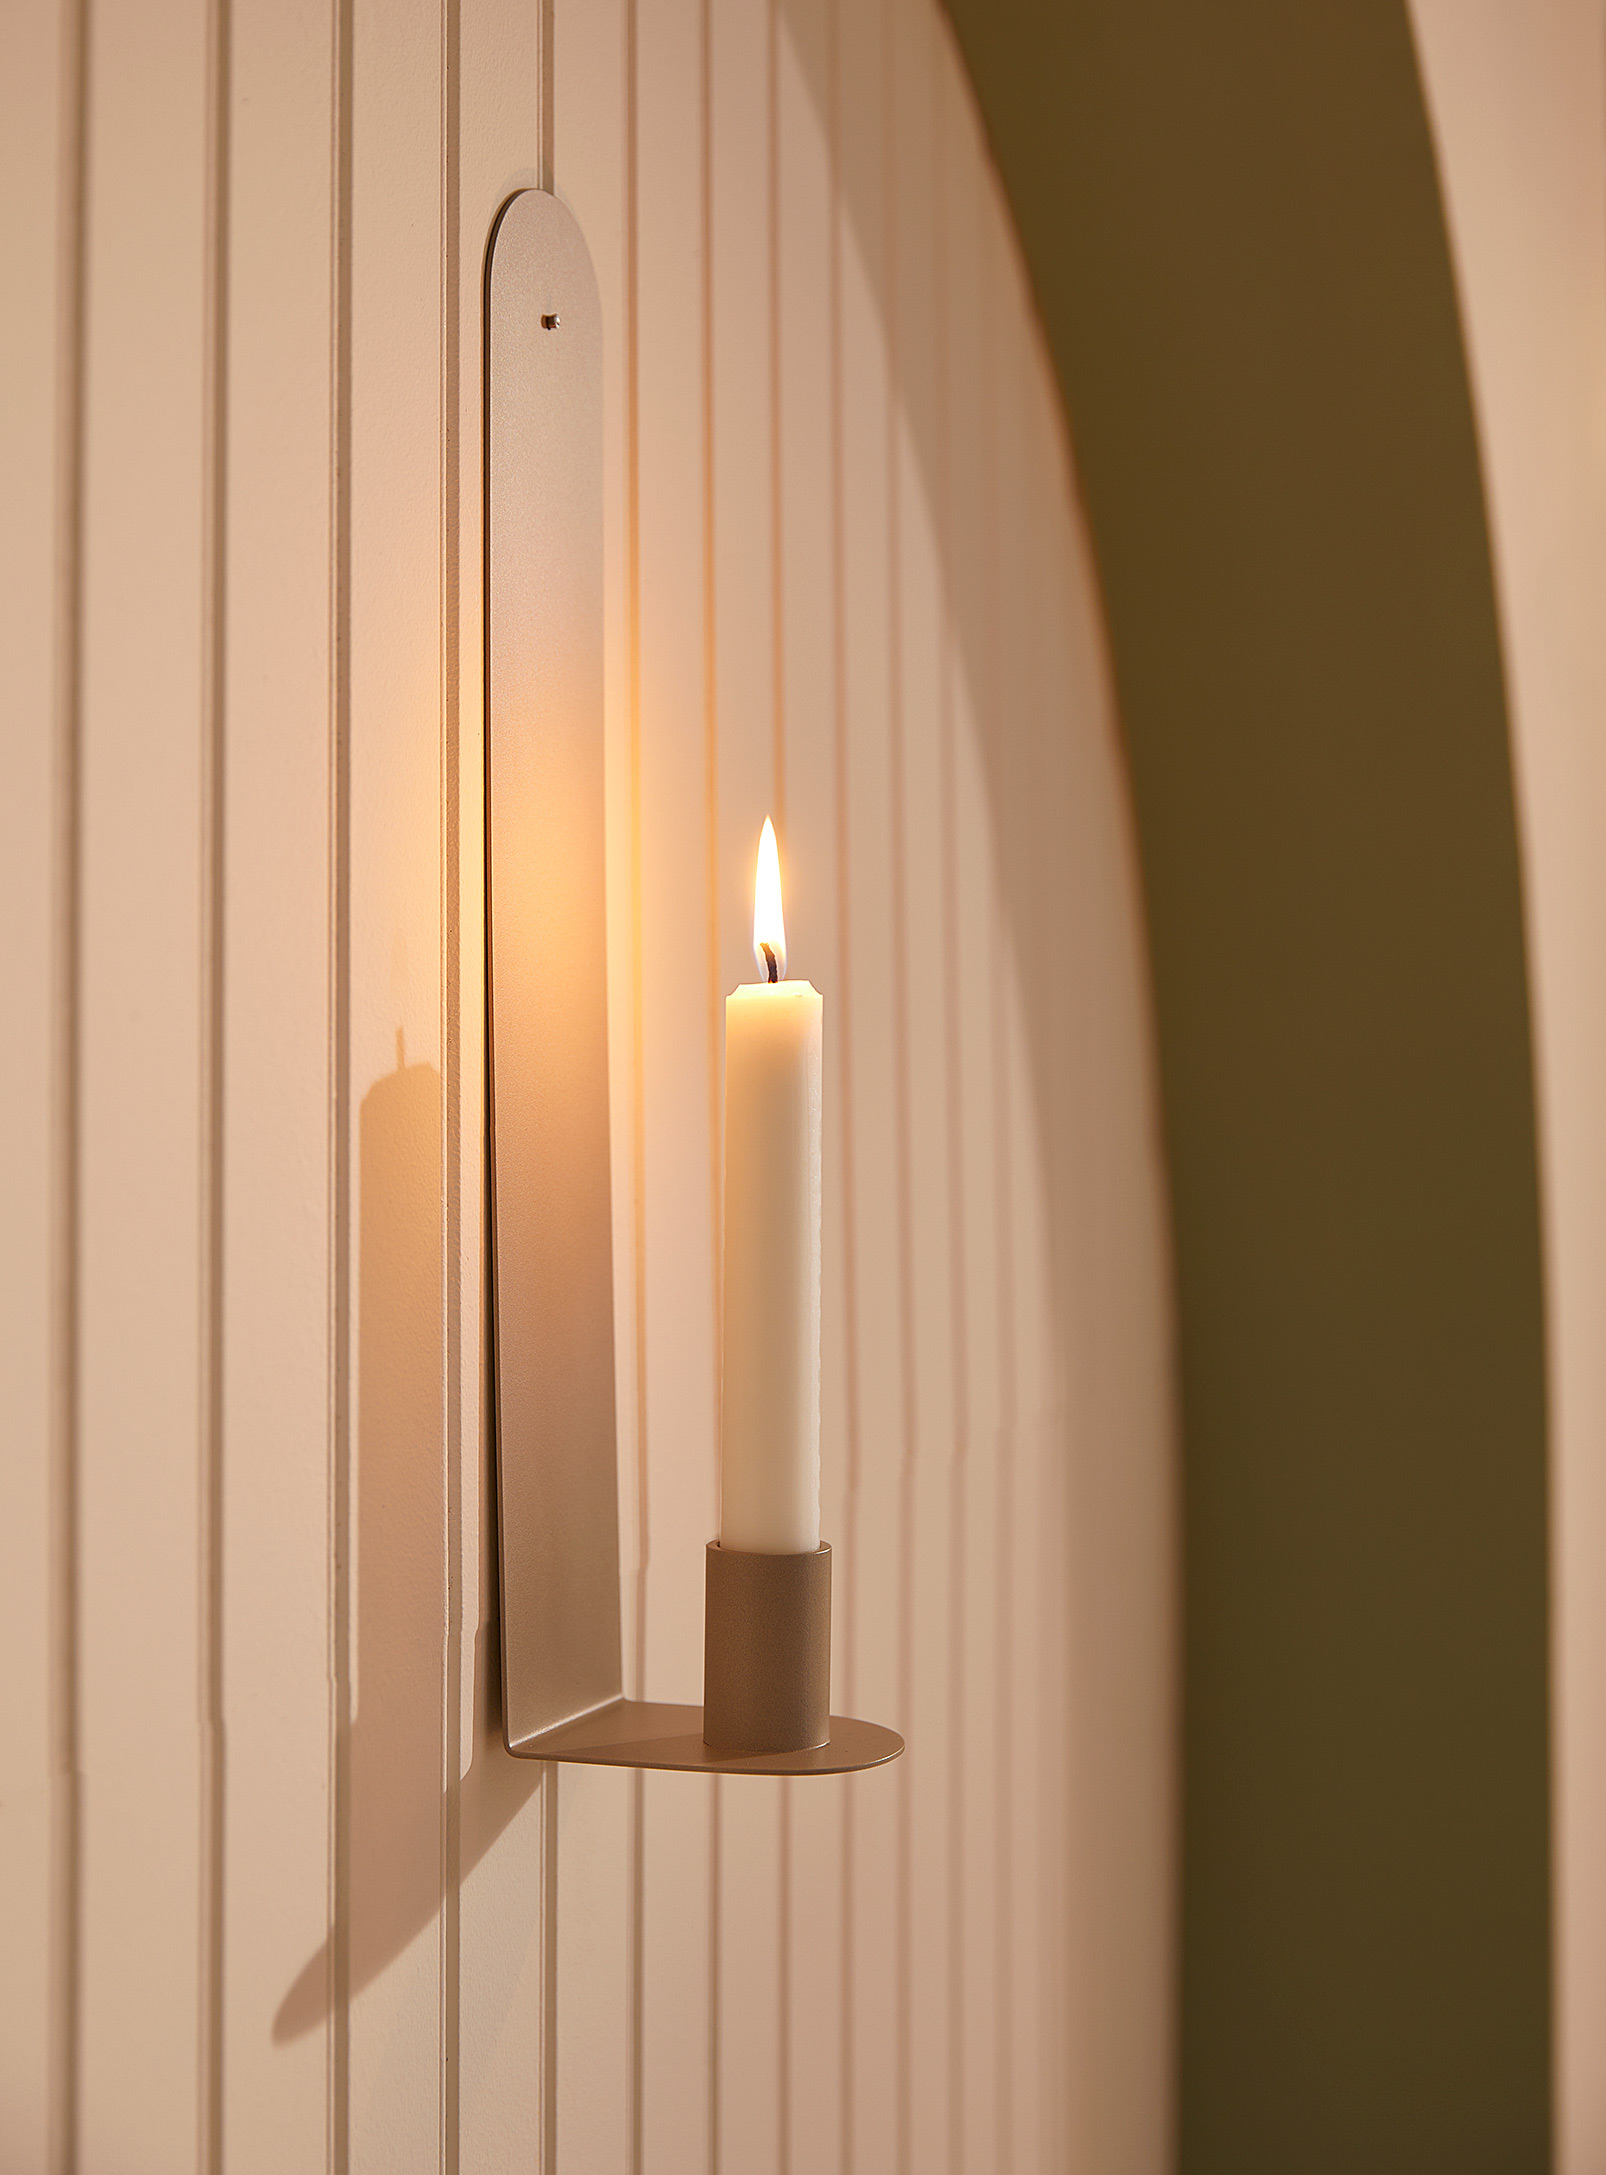 Luminaire Authentik Minimalist Table And Wall Candle Holder In Ecru/linen